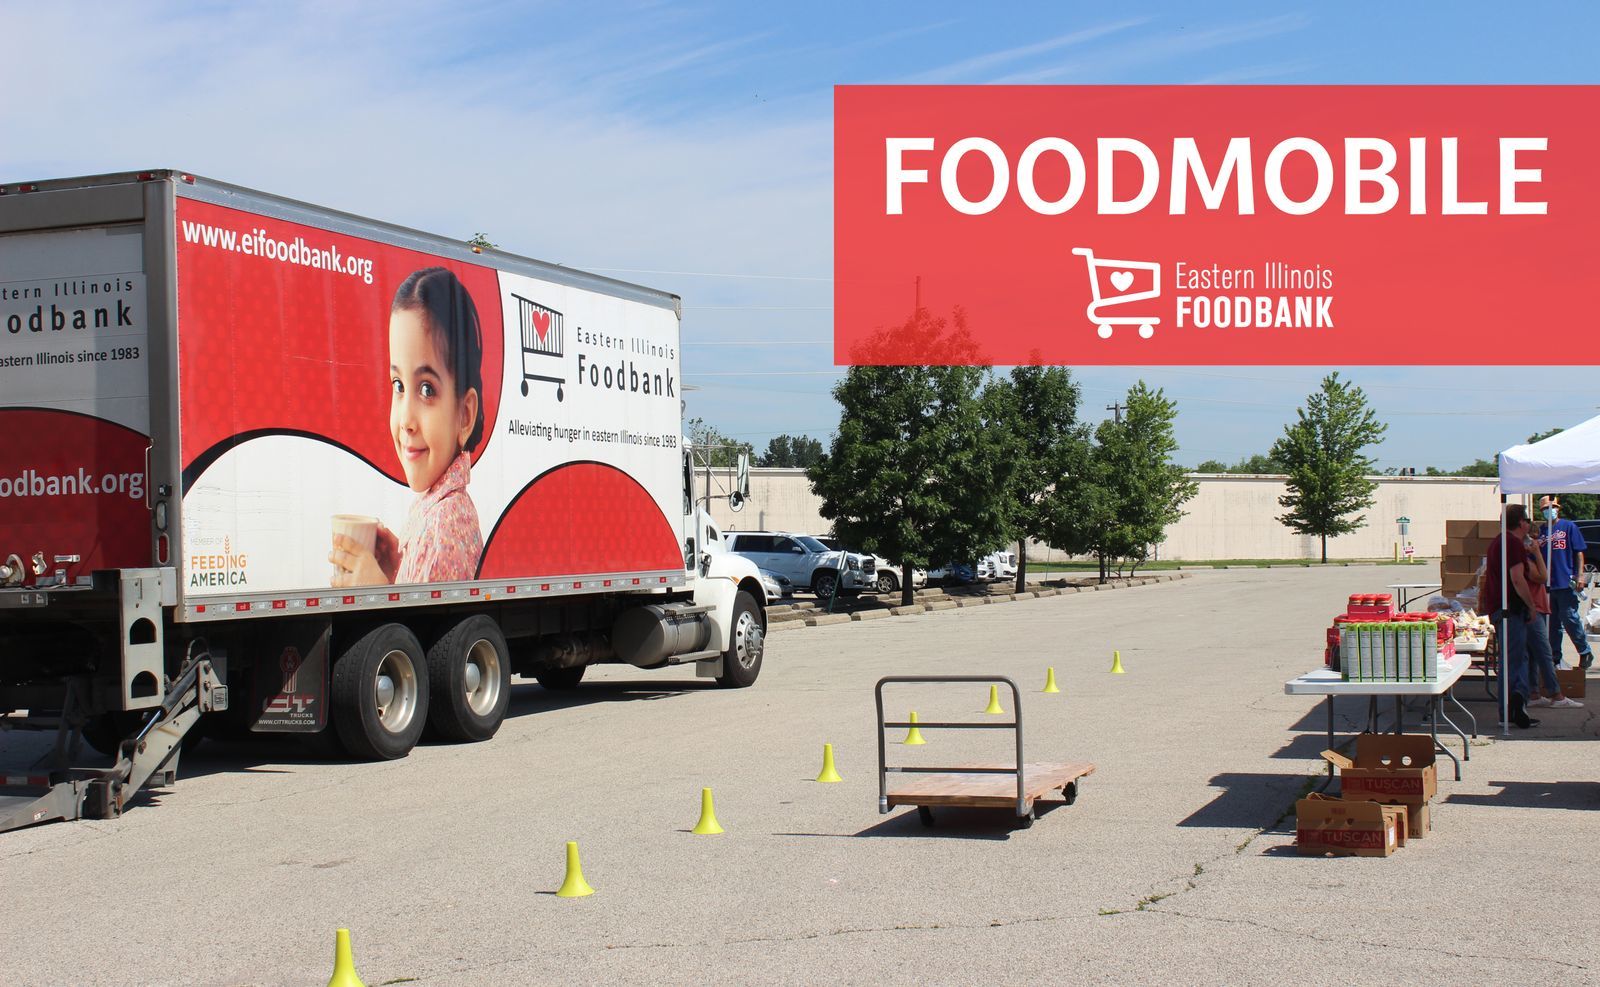 Foodmobile in Danville, IL Calendar of Events Events News